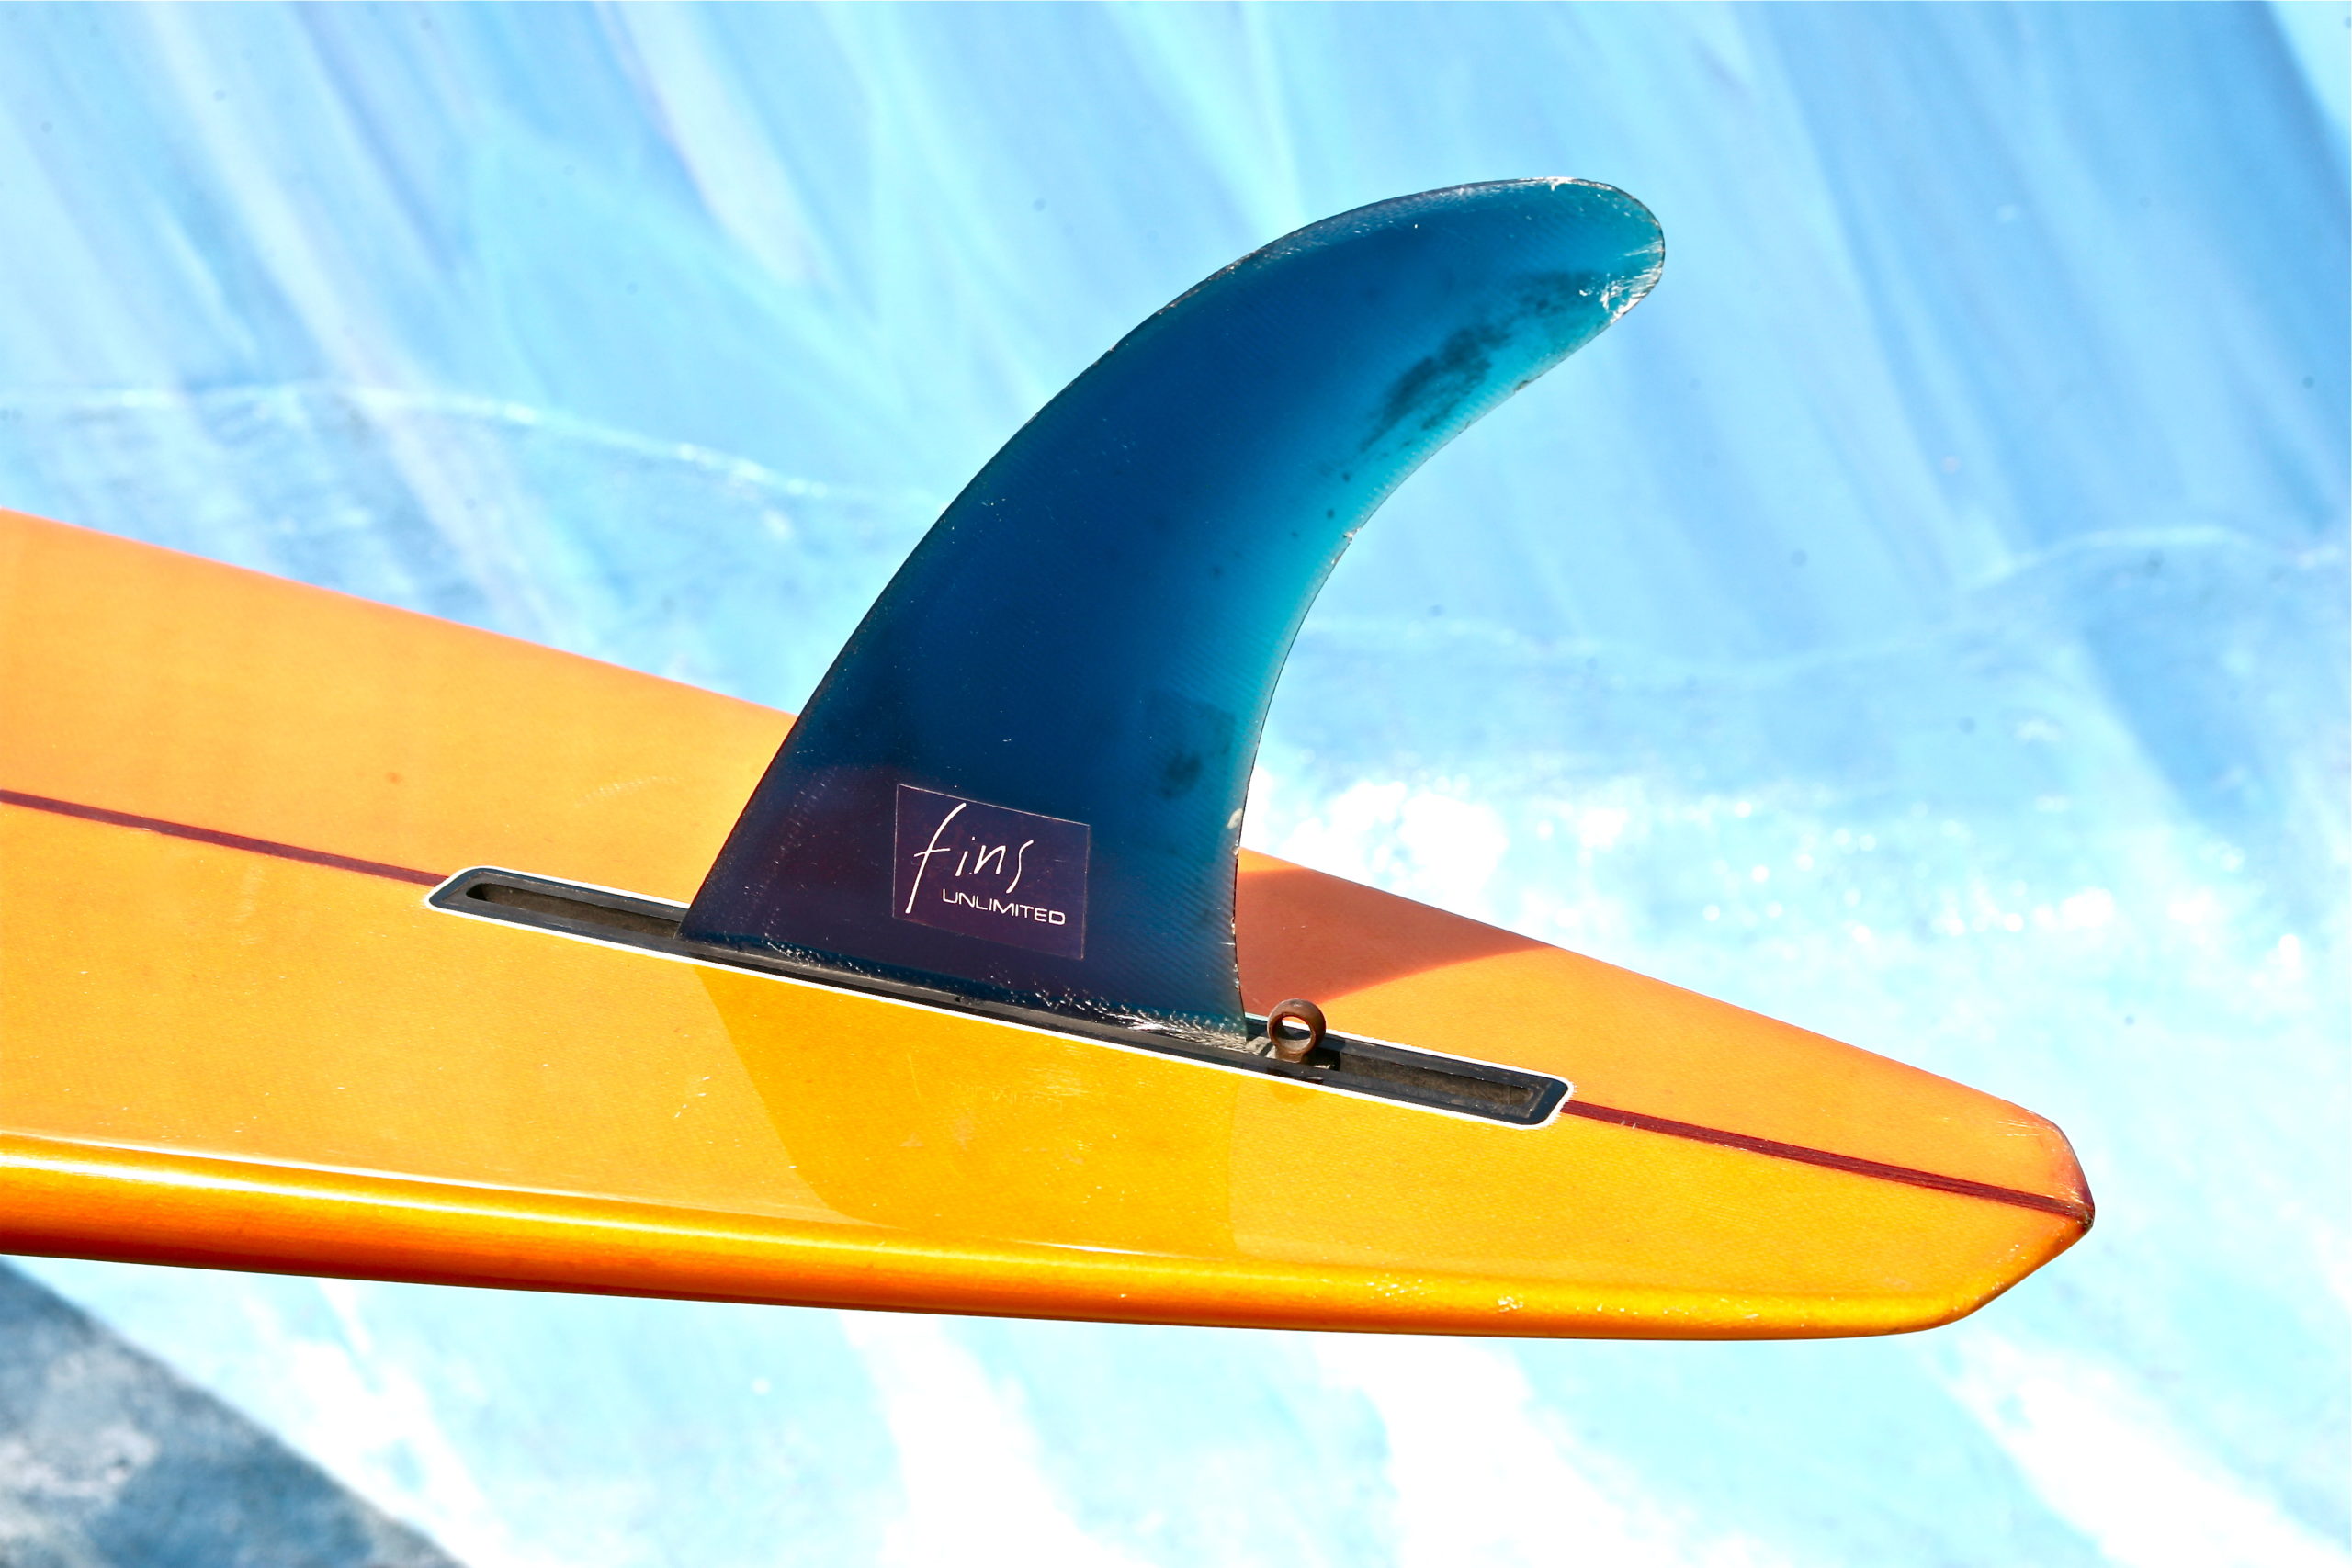 The future fins are very easy to install and are available at affordable prices